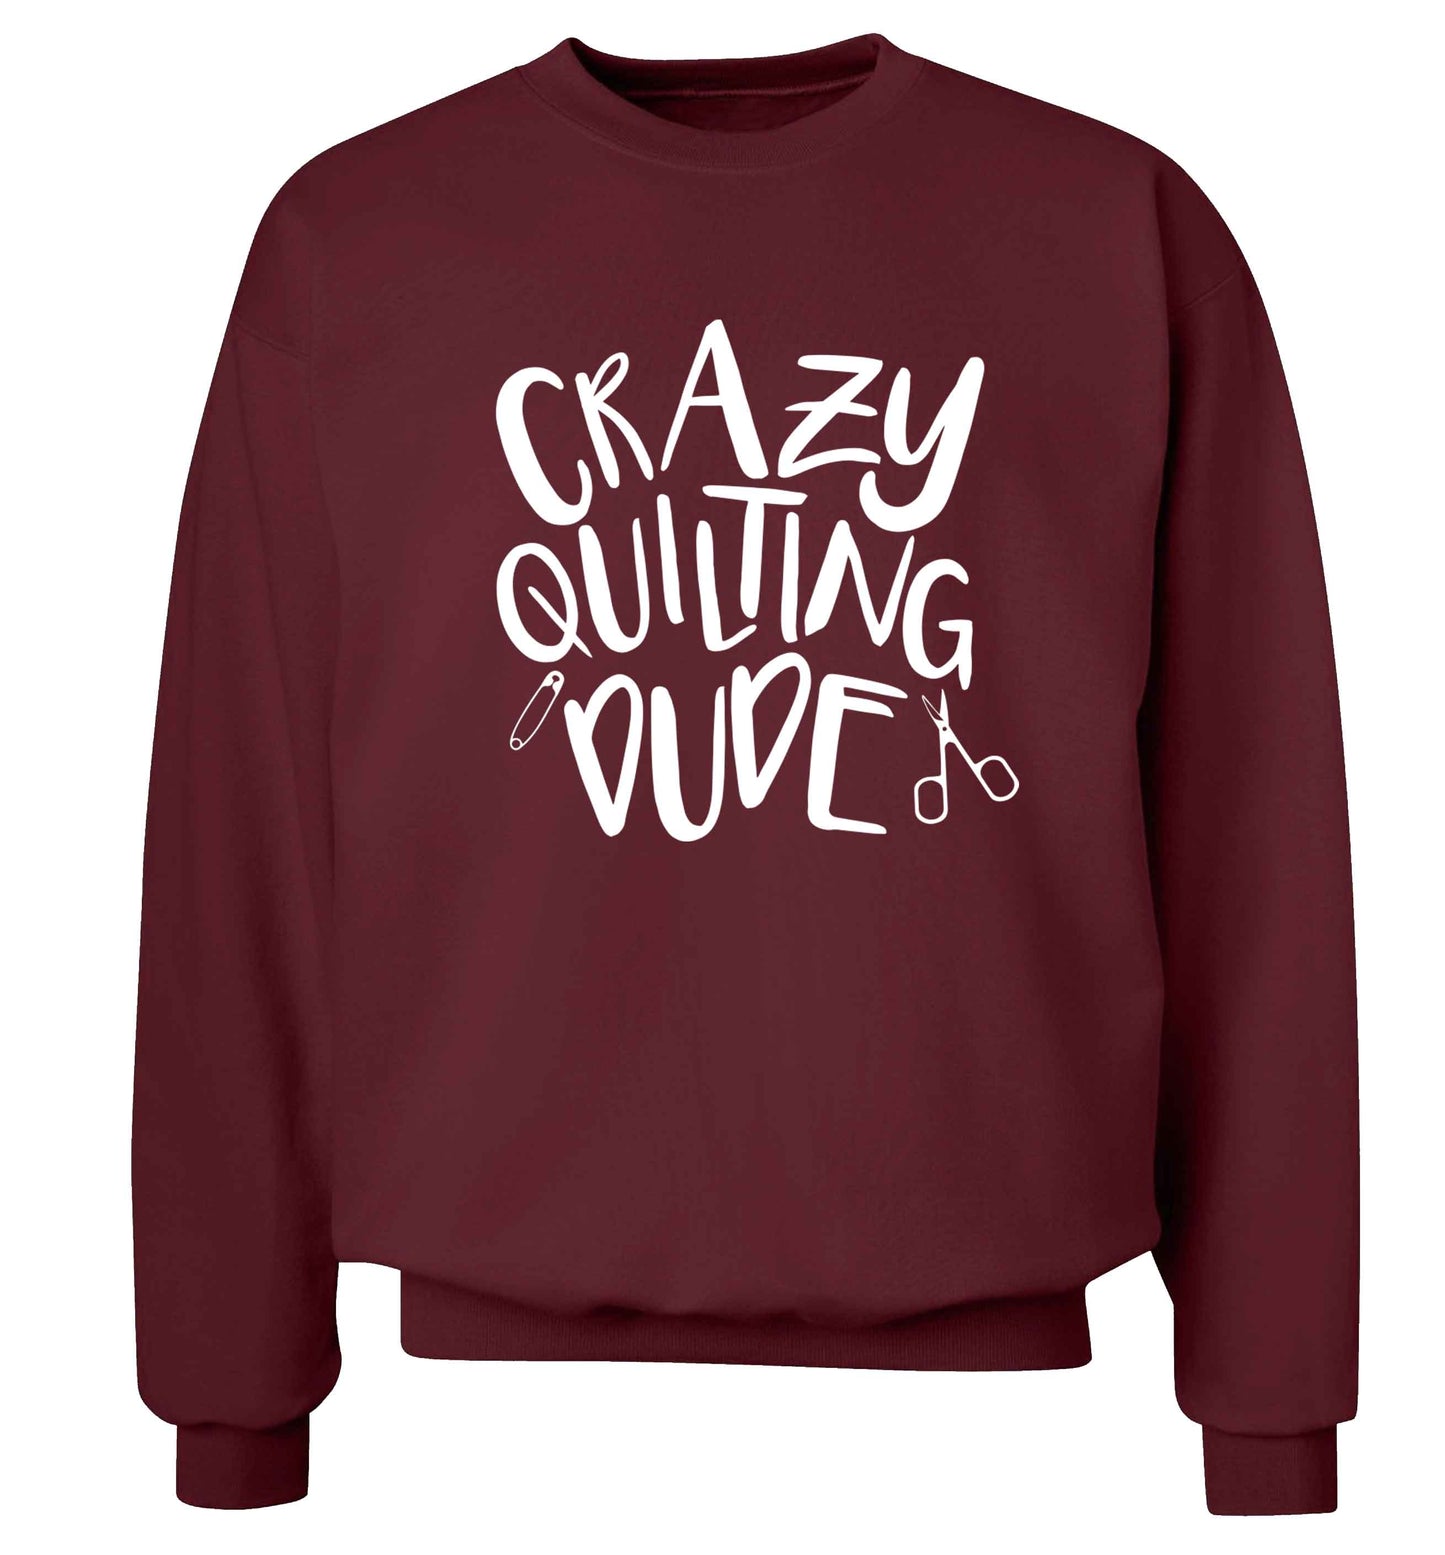 Crazy quilting dude Adult's unisex maroon Sweater 2XL